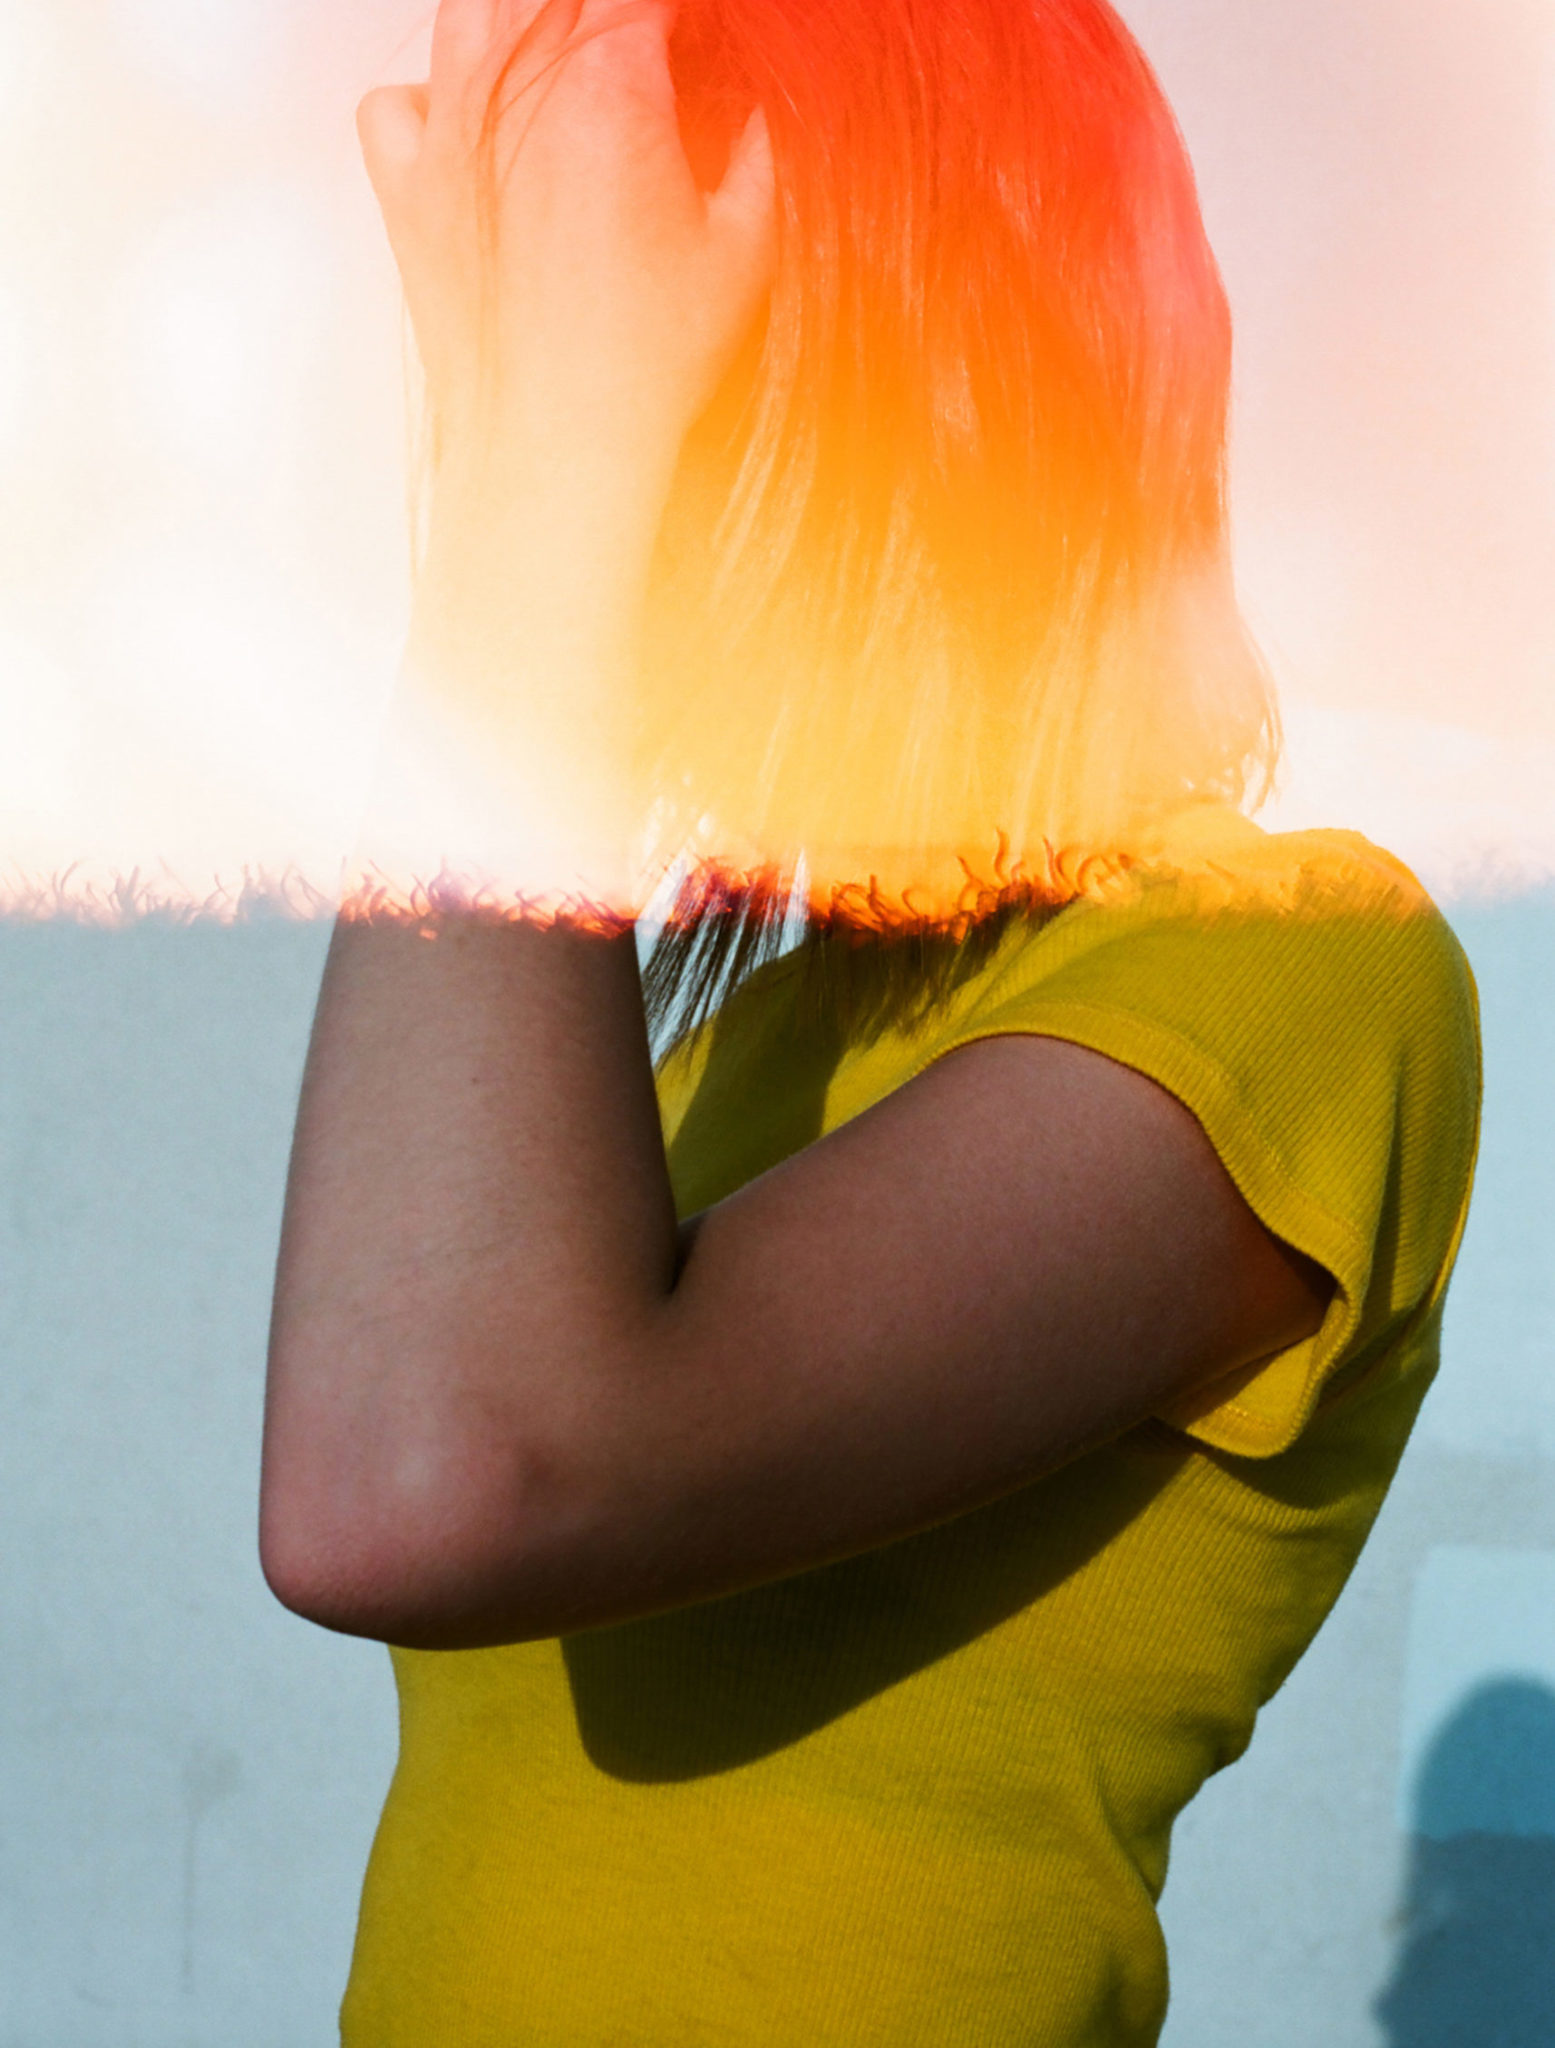 AW126 How Long Do Hot Flashes Last? (1) (film photo with light leaks showing woman with hand on head in profile)